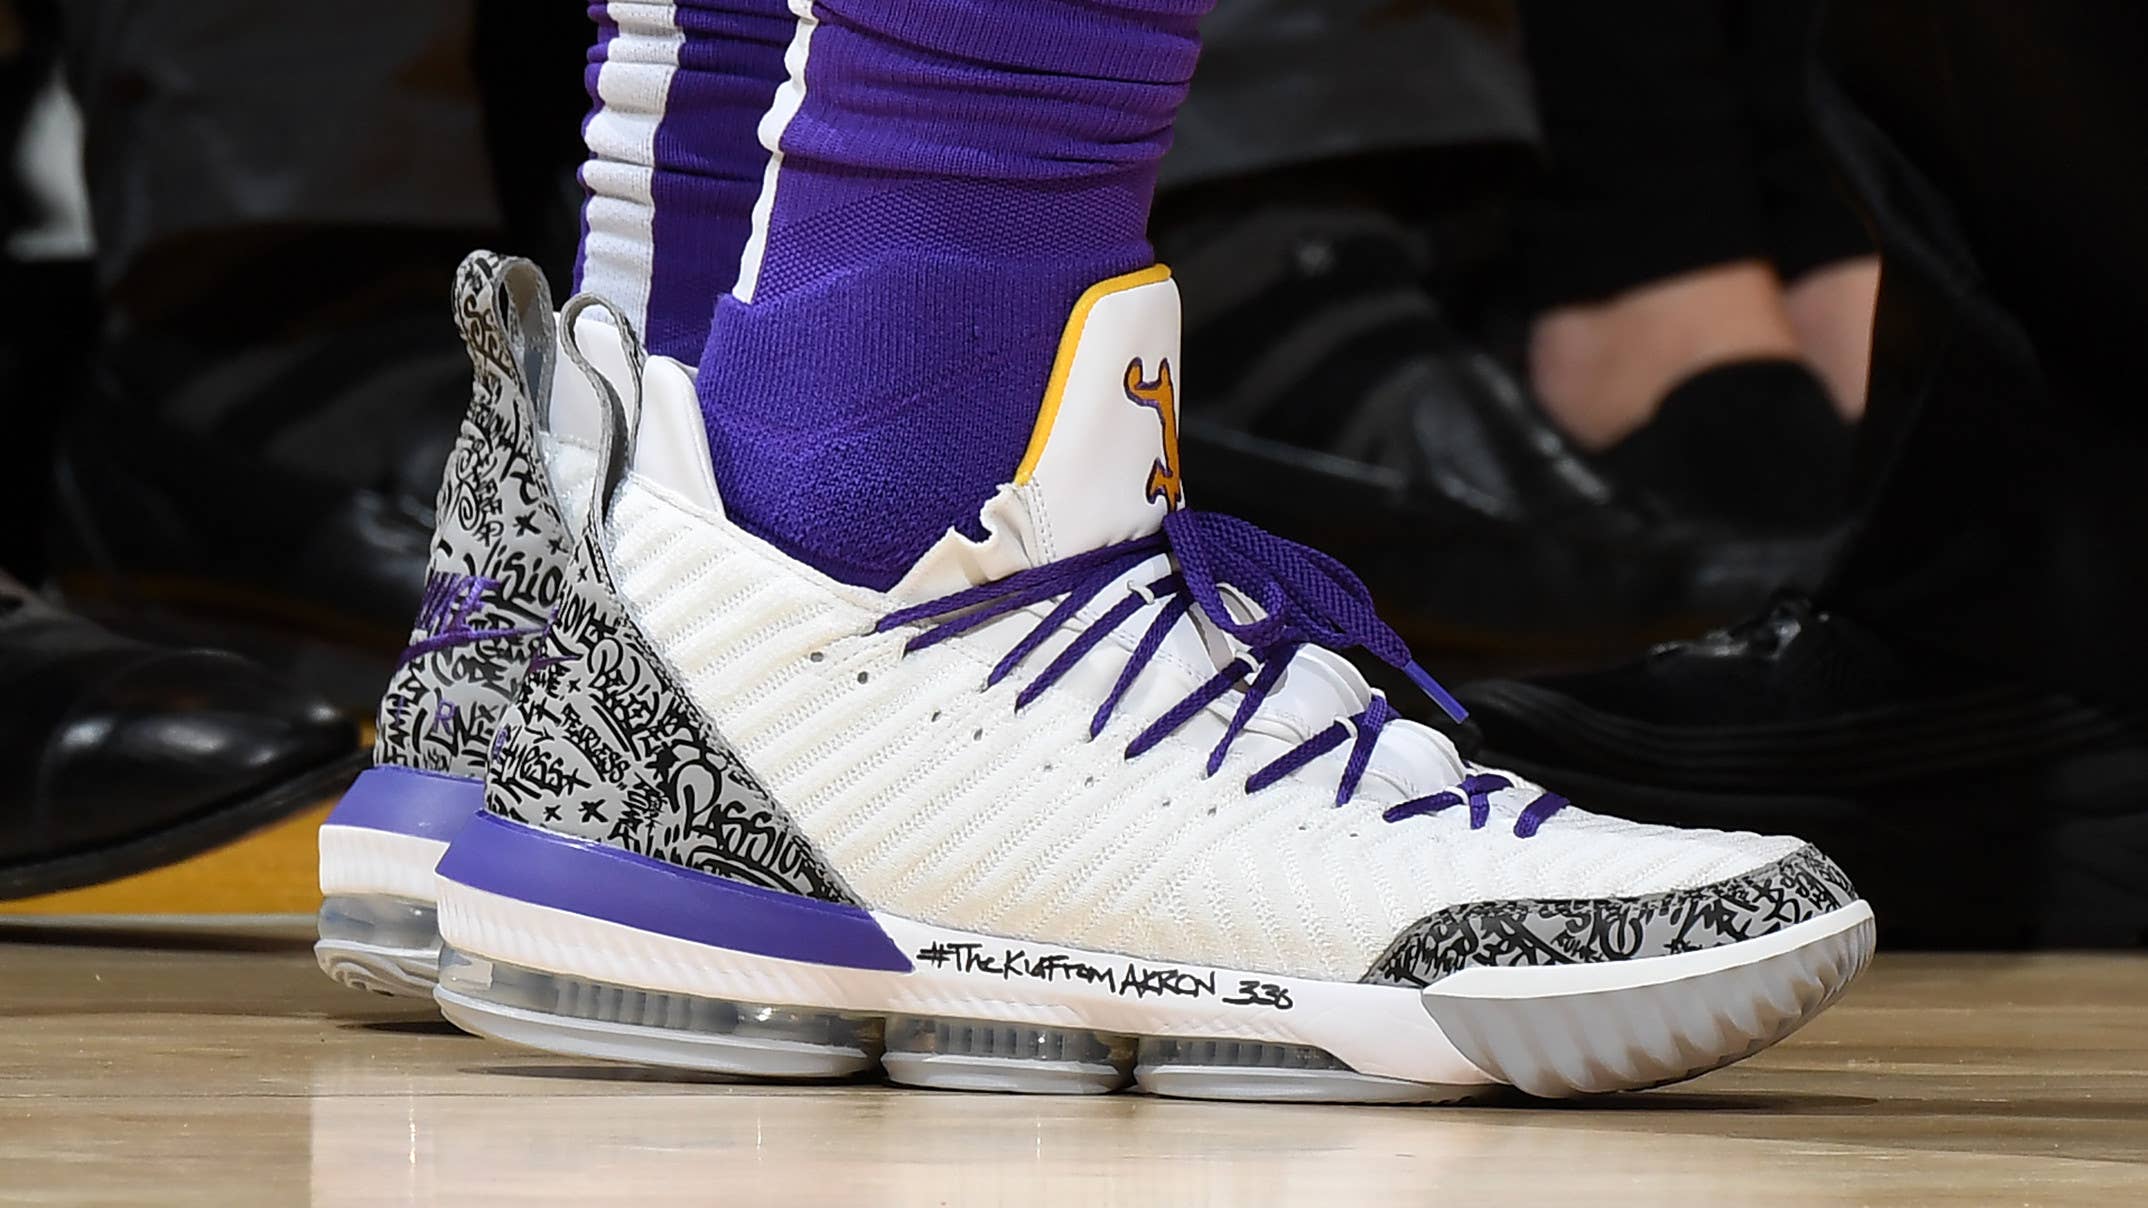 SoleWatch: LeBron James Makes History in Air Jordan 3-Inspired LeBron 16s